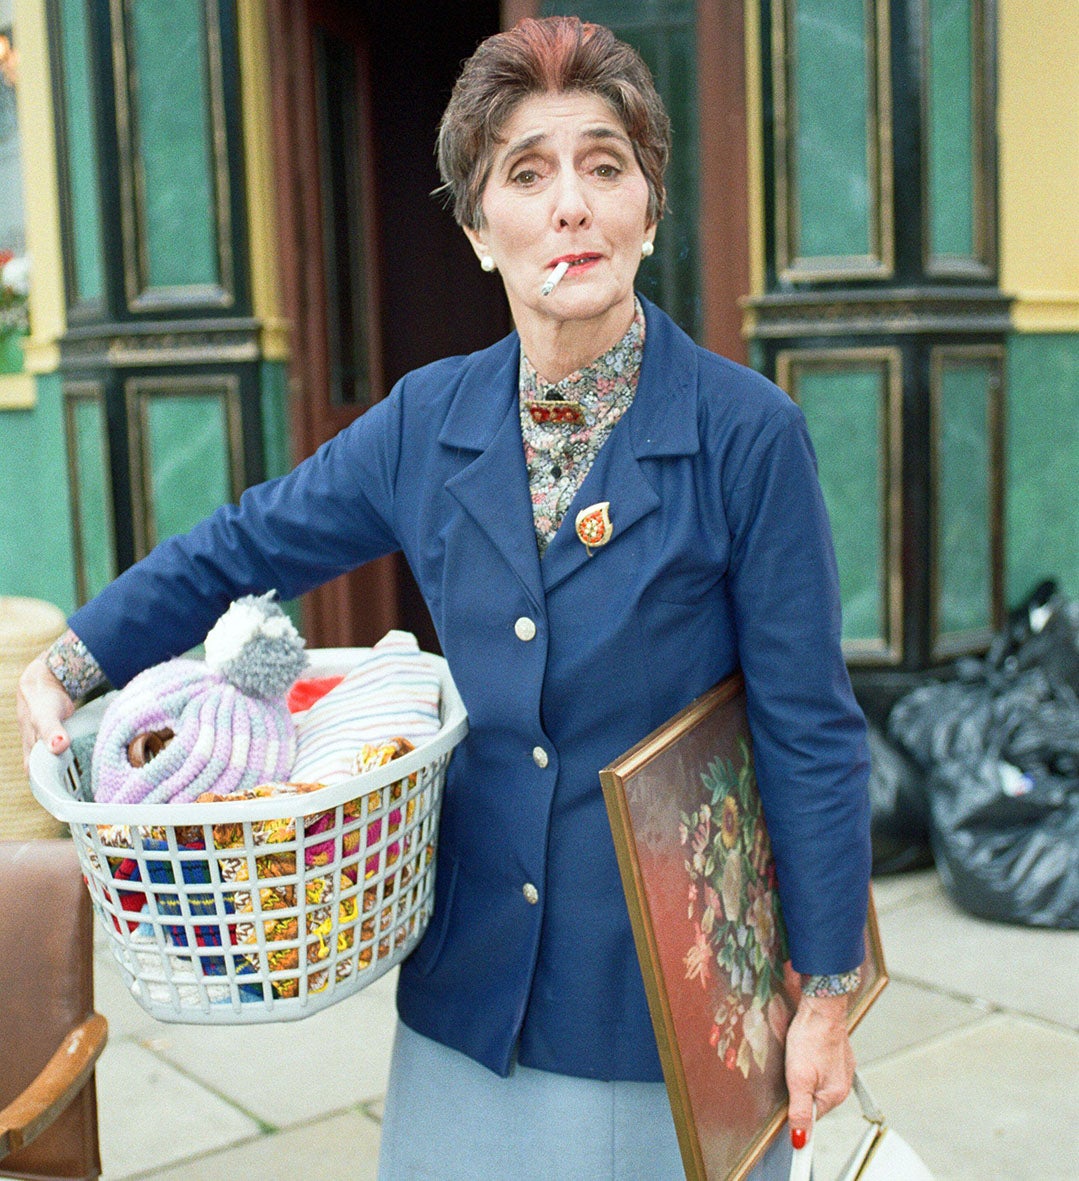 Remembering June Brown, a British cultural icon